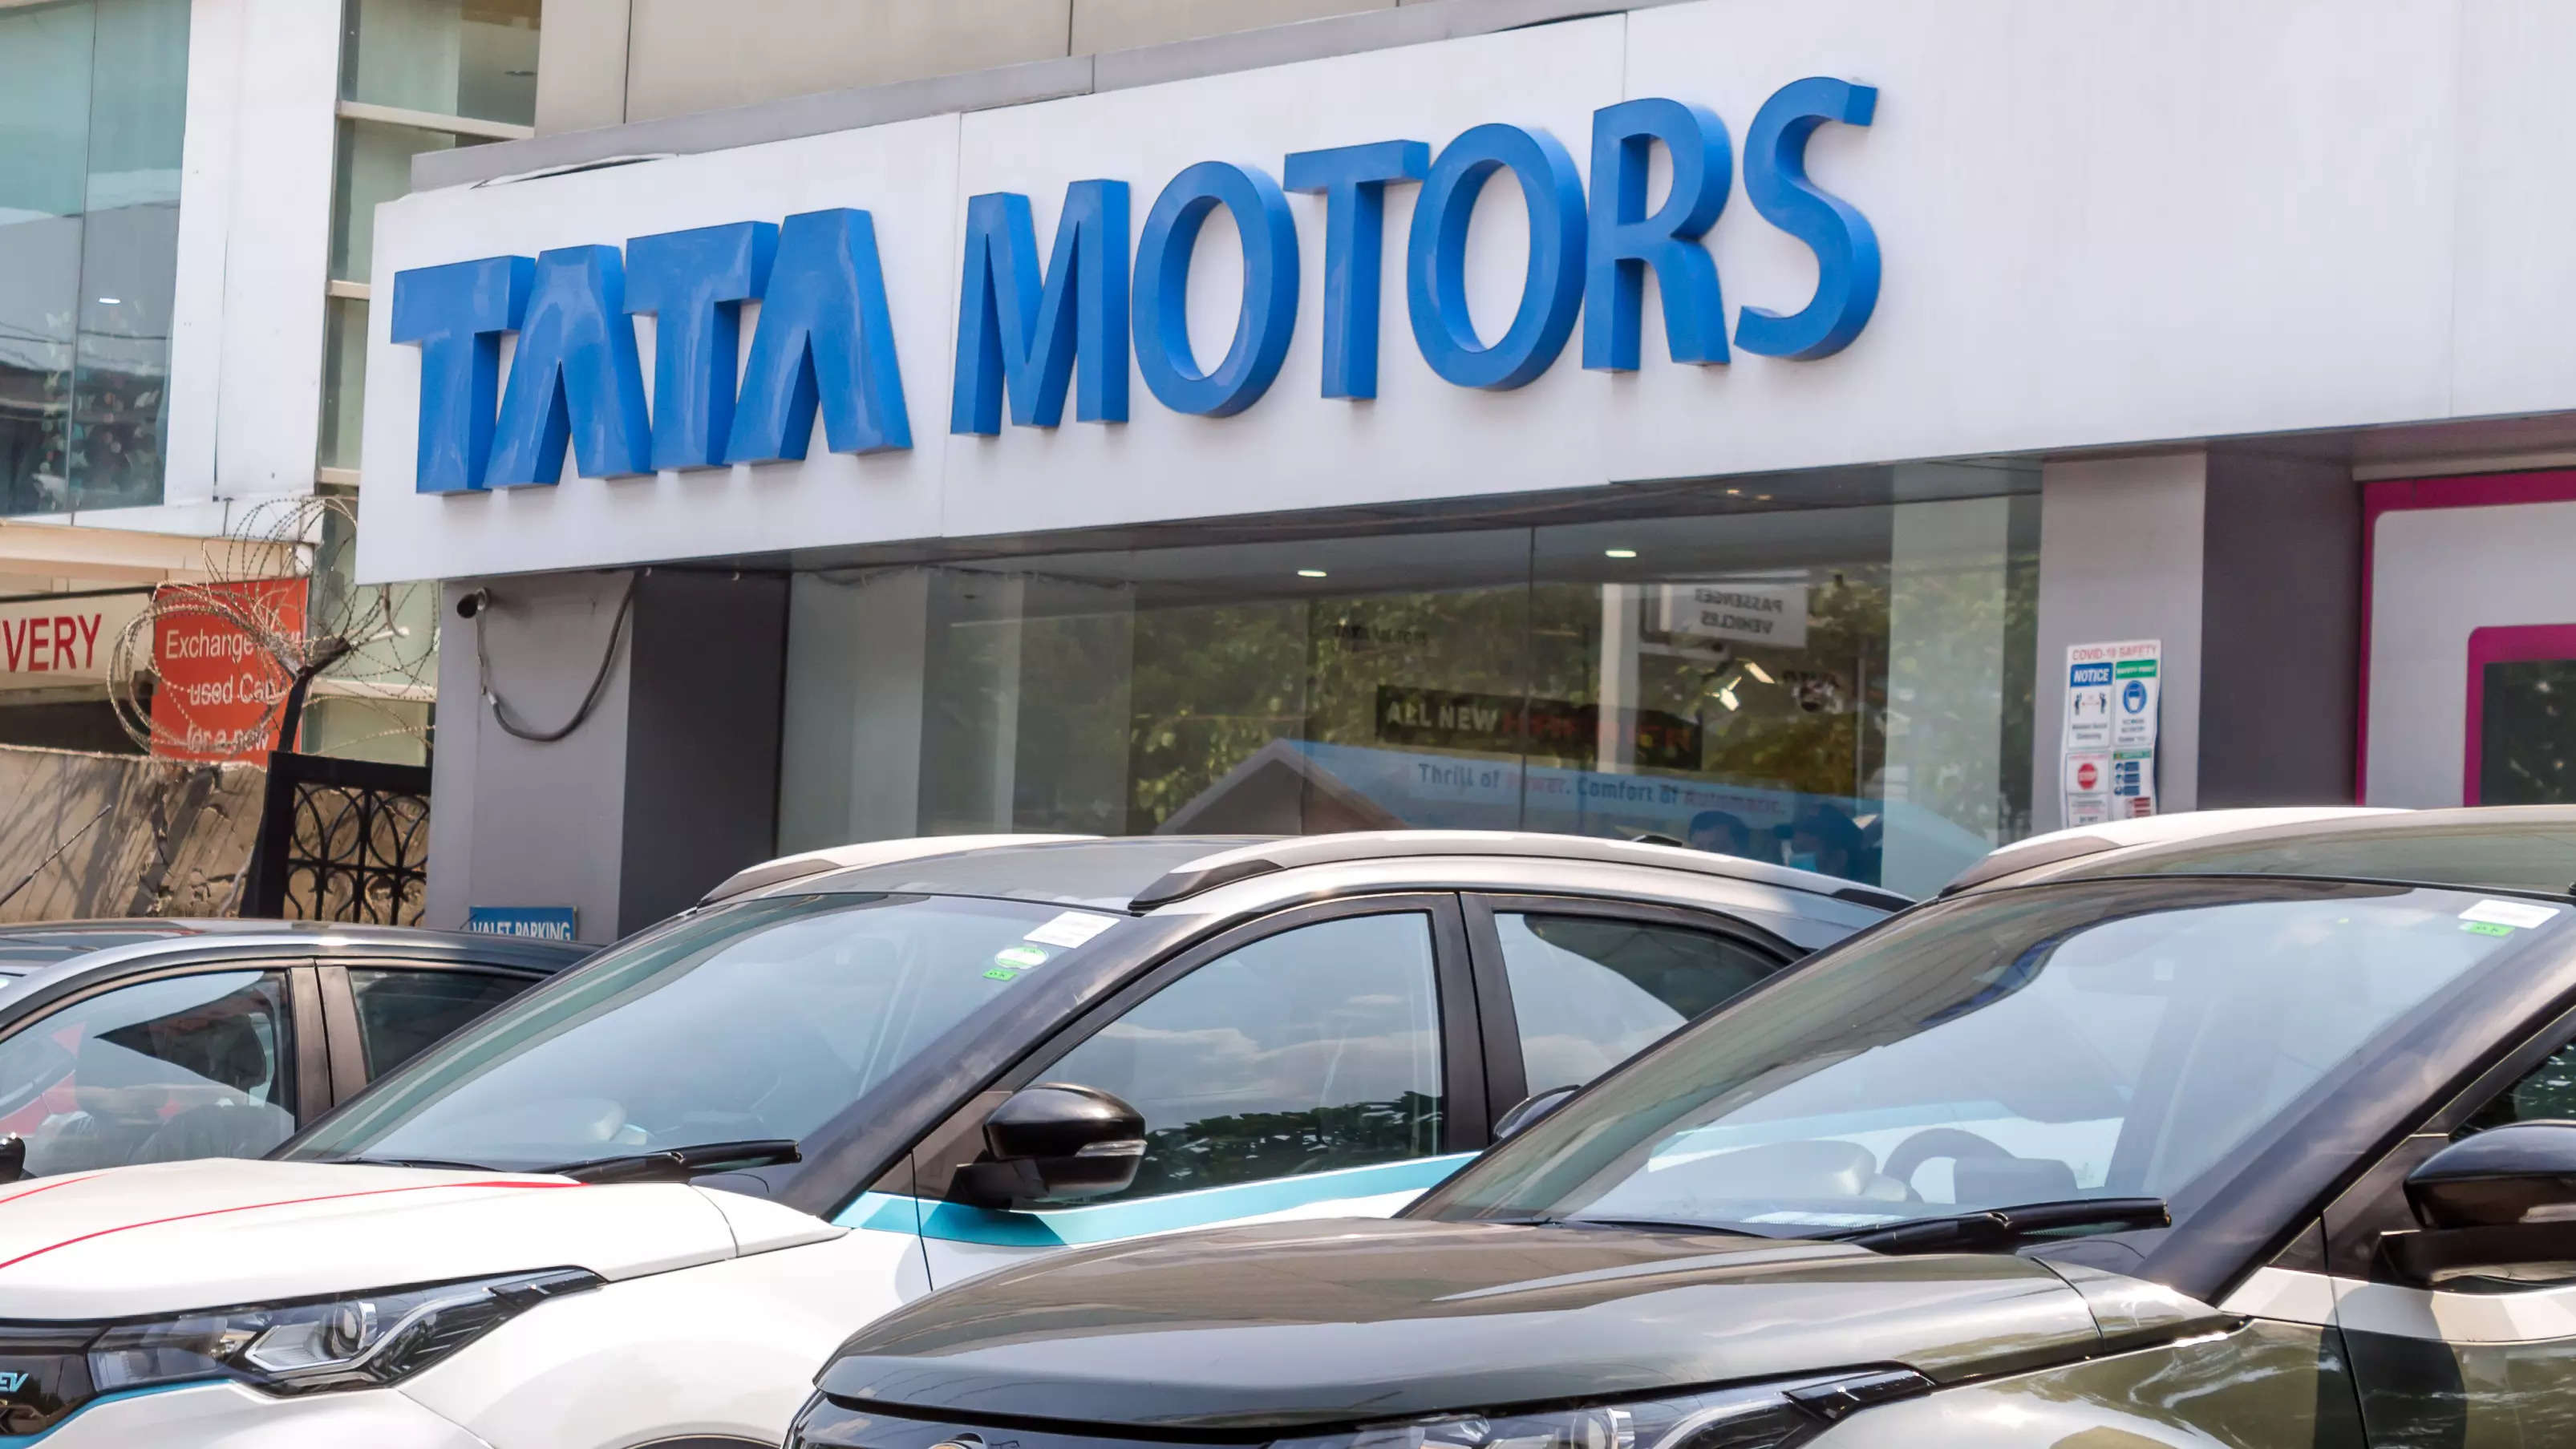  According to the release, Tata Motors Limited saw a growth of 27% in total domestic sales.